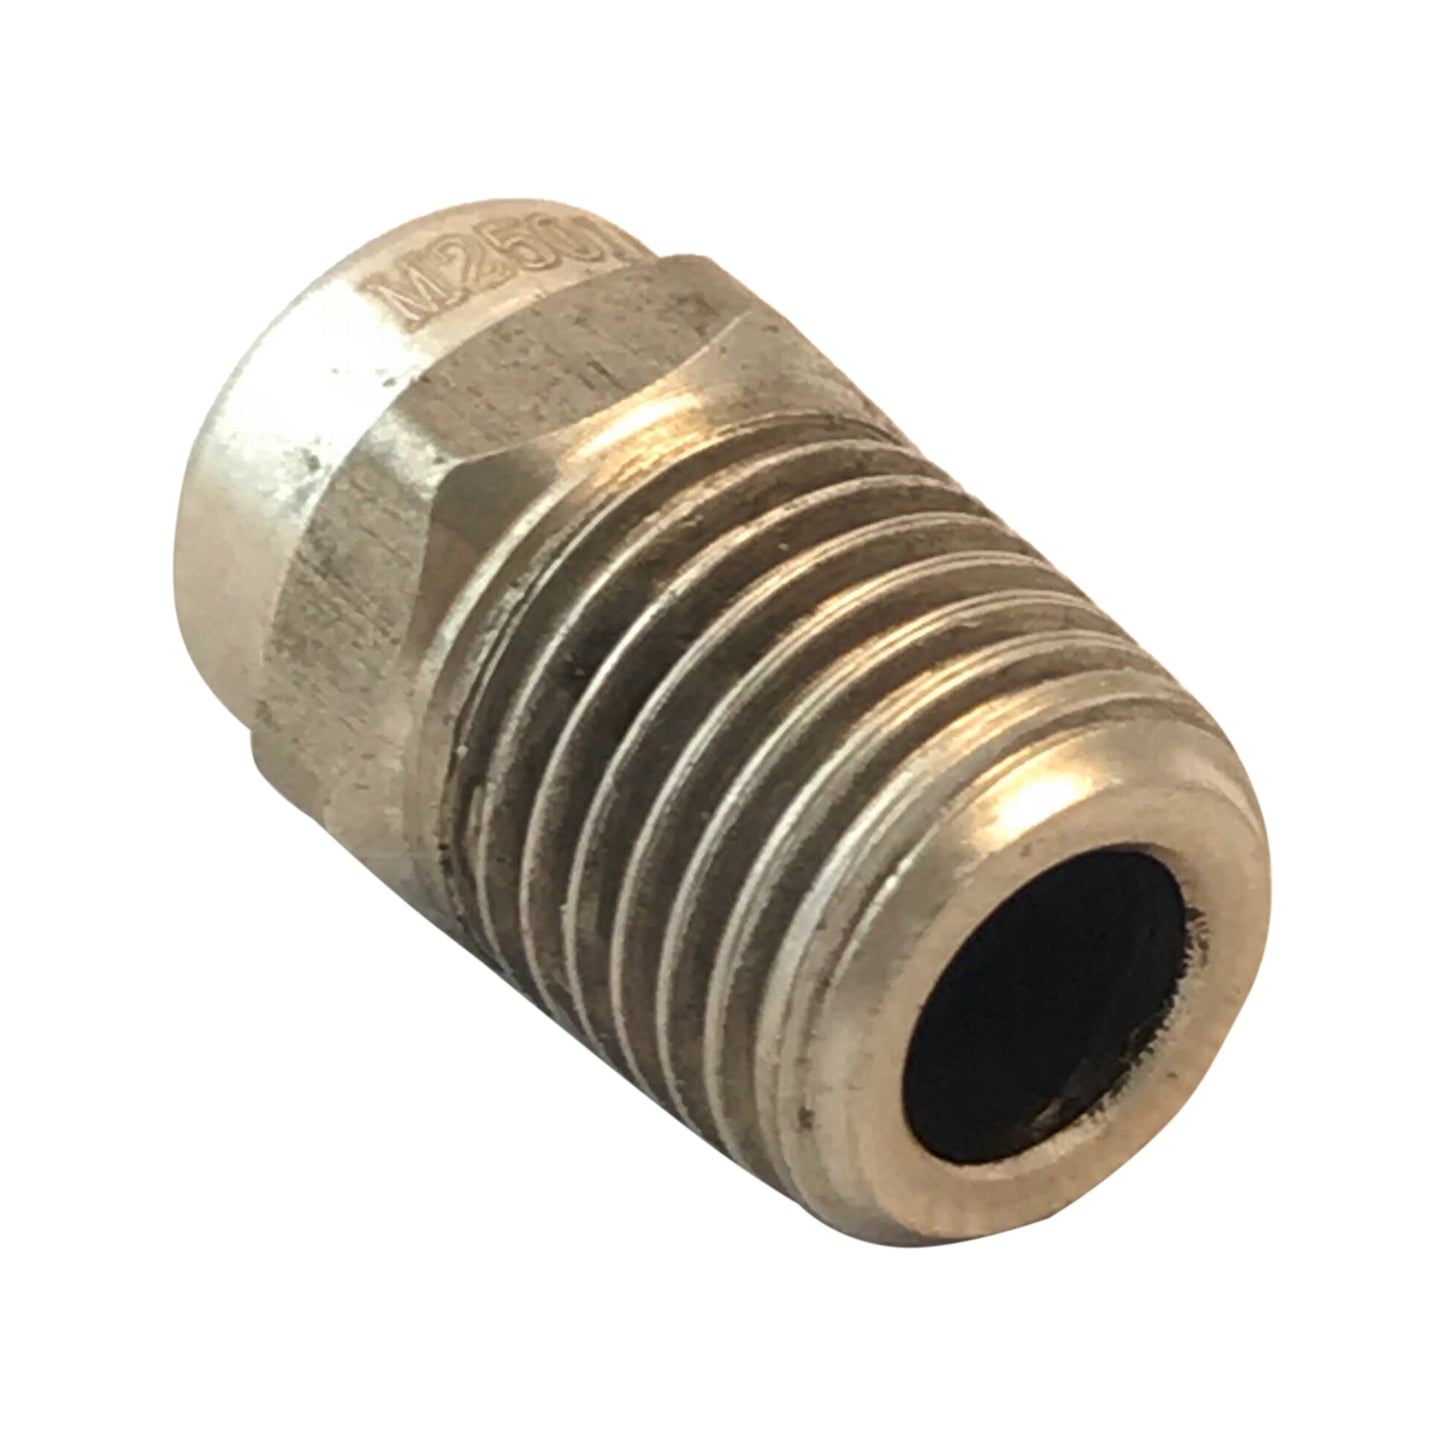 1/4" Rotary Surface Cleaner and Water Broom Replacement Nozzles